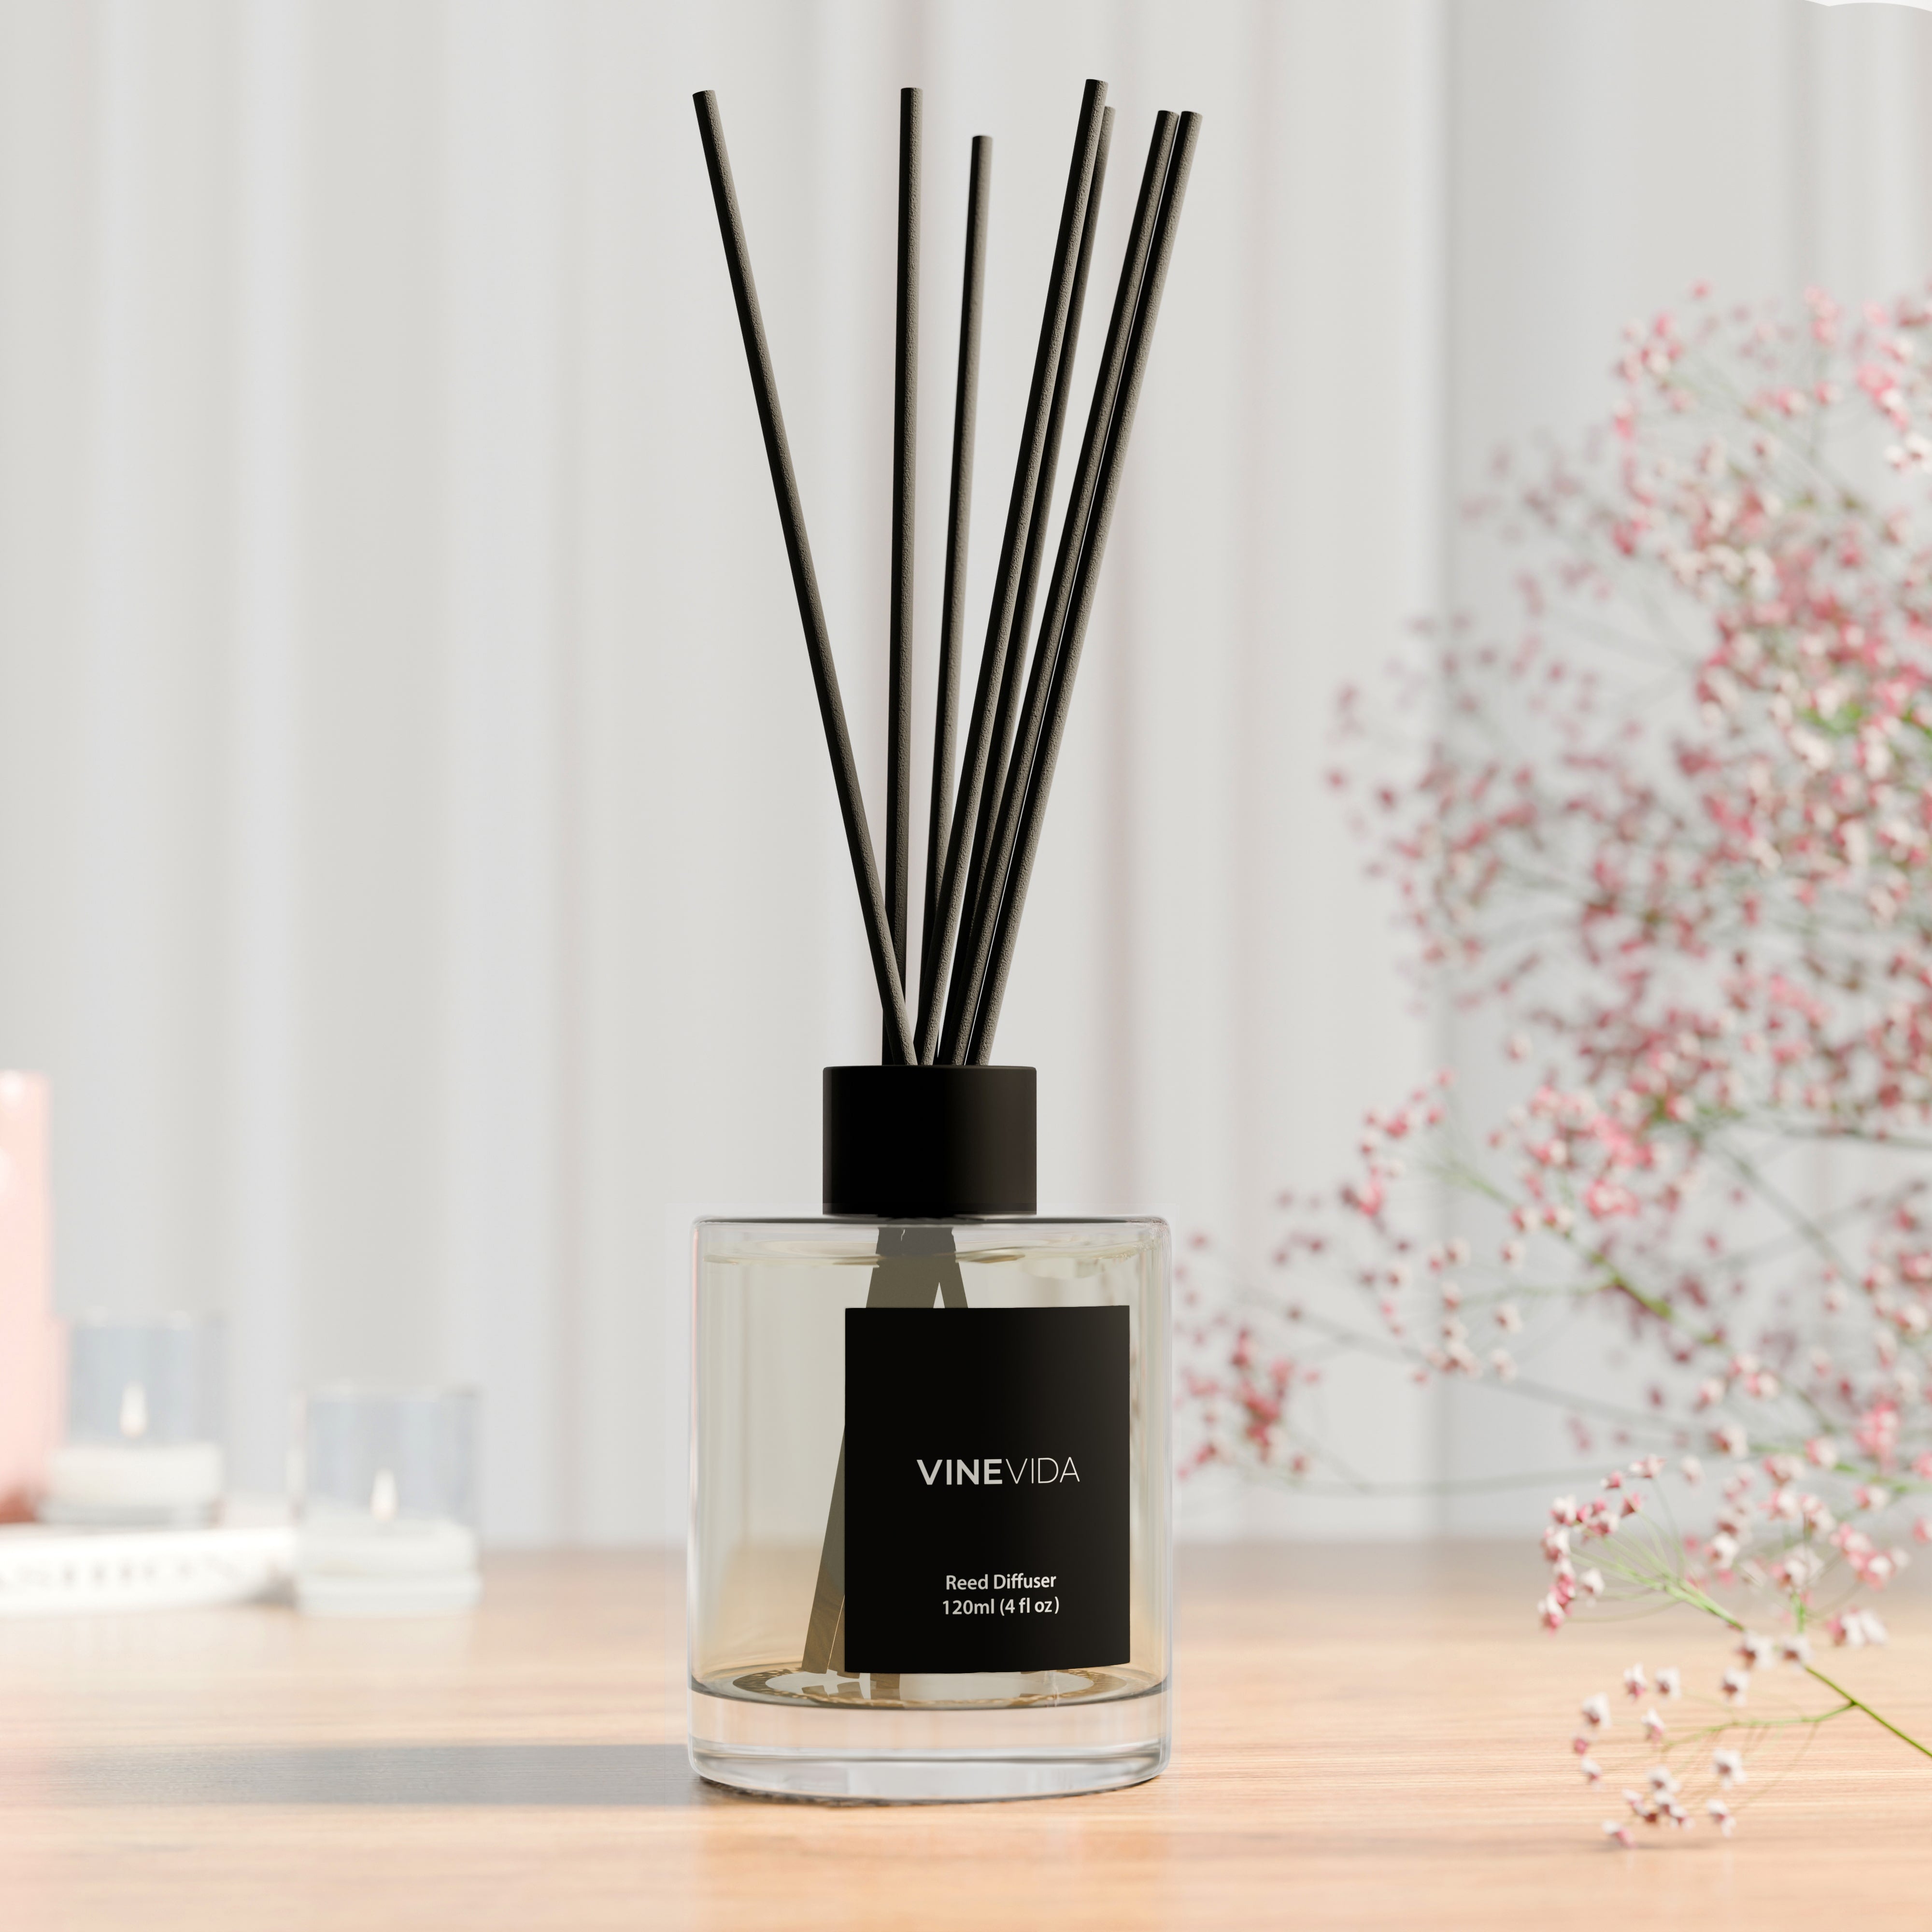 NO. 1304 Reed Diffuser - Inspired by: Santal 33 by Le Labo